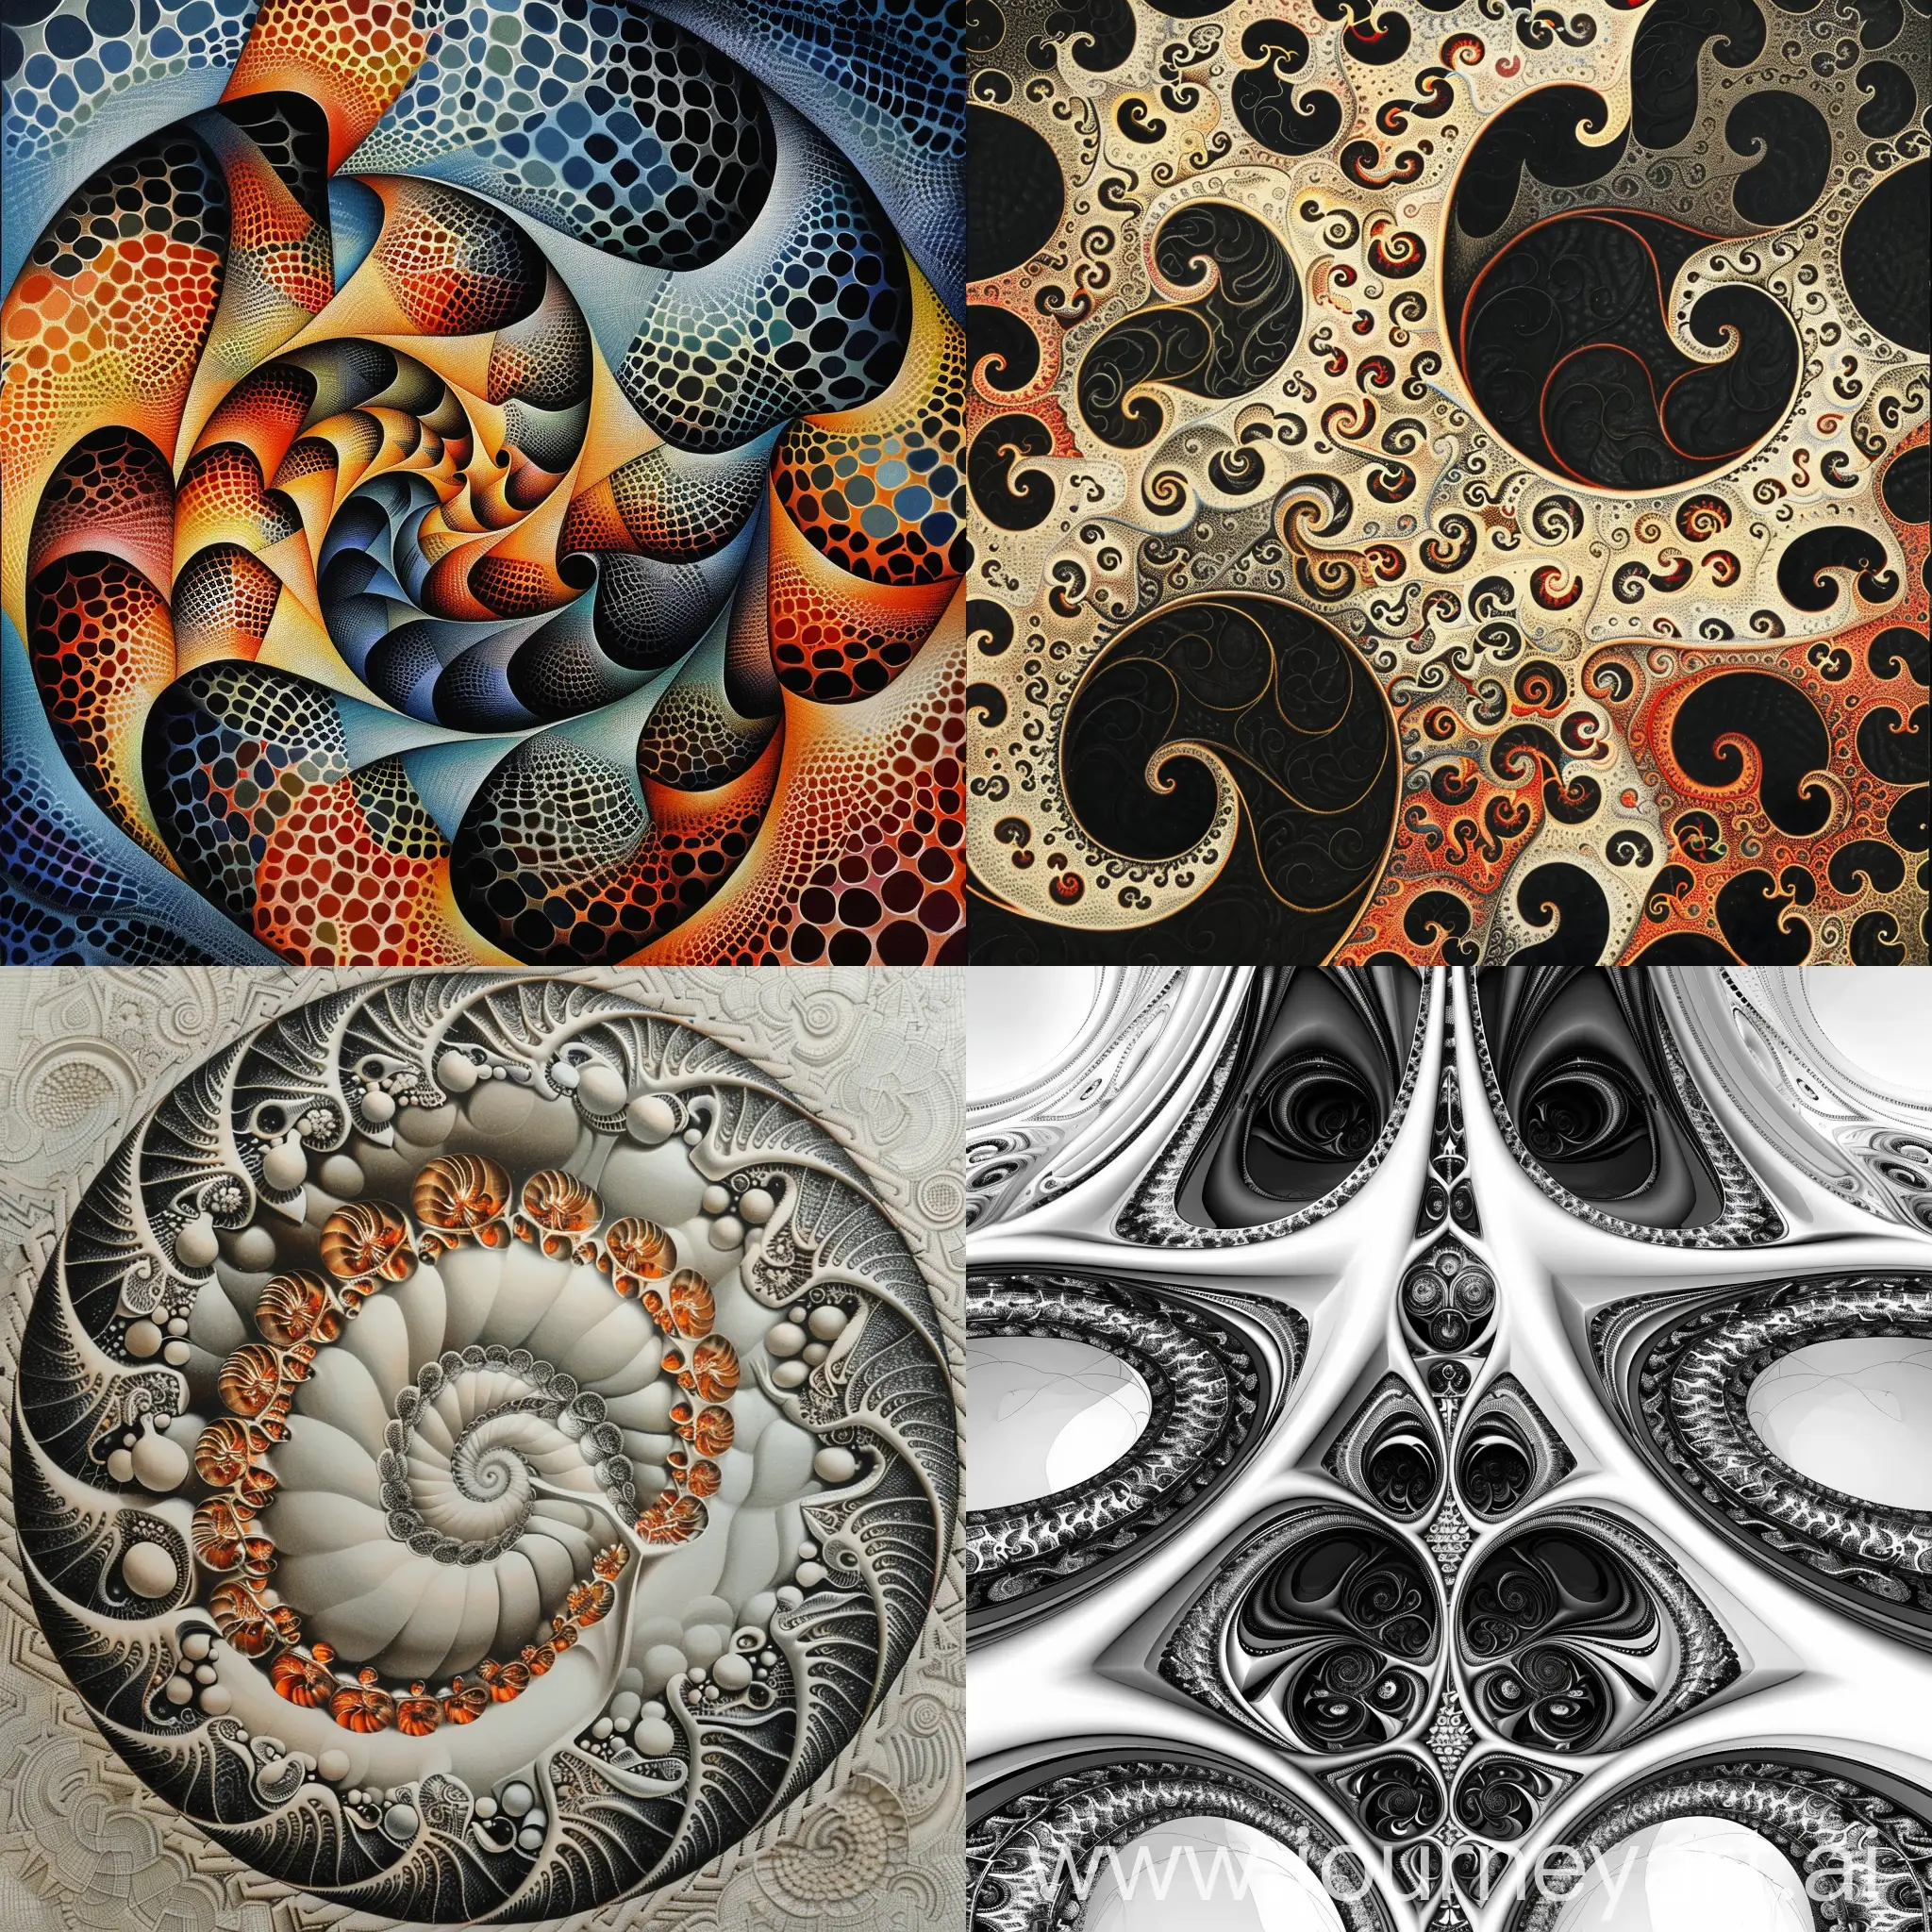 HighQuality-Fractal-Art-Intricate-Geometric-Patterns-in-Stunning-Detail